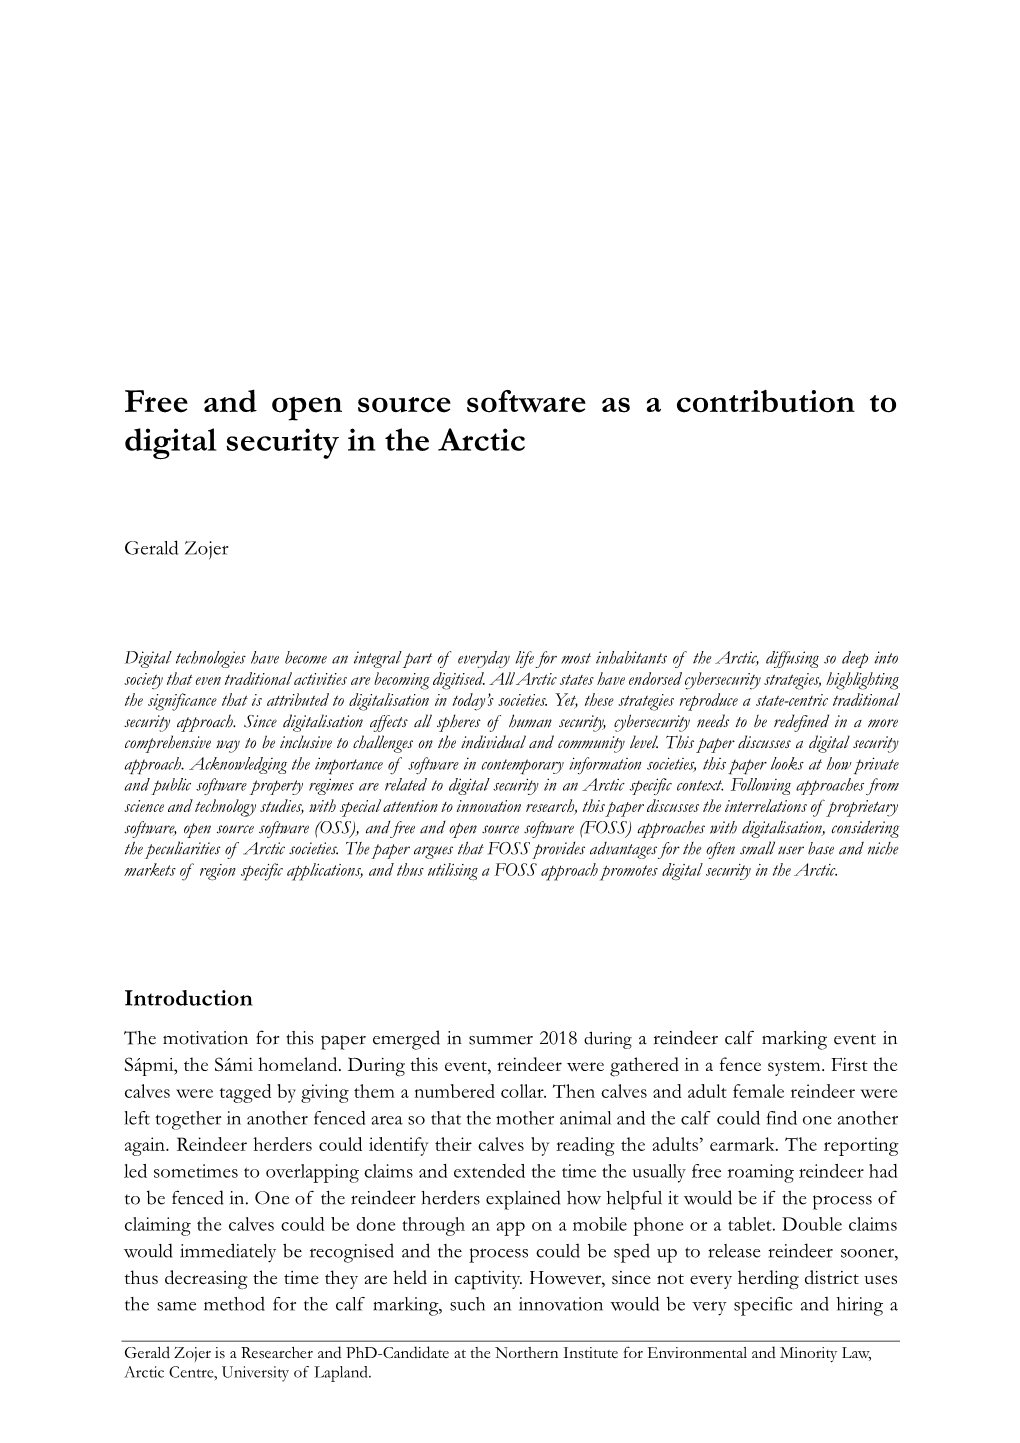 Free and Open Source Software As a Contribution to Digital Security in the Arctic